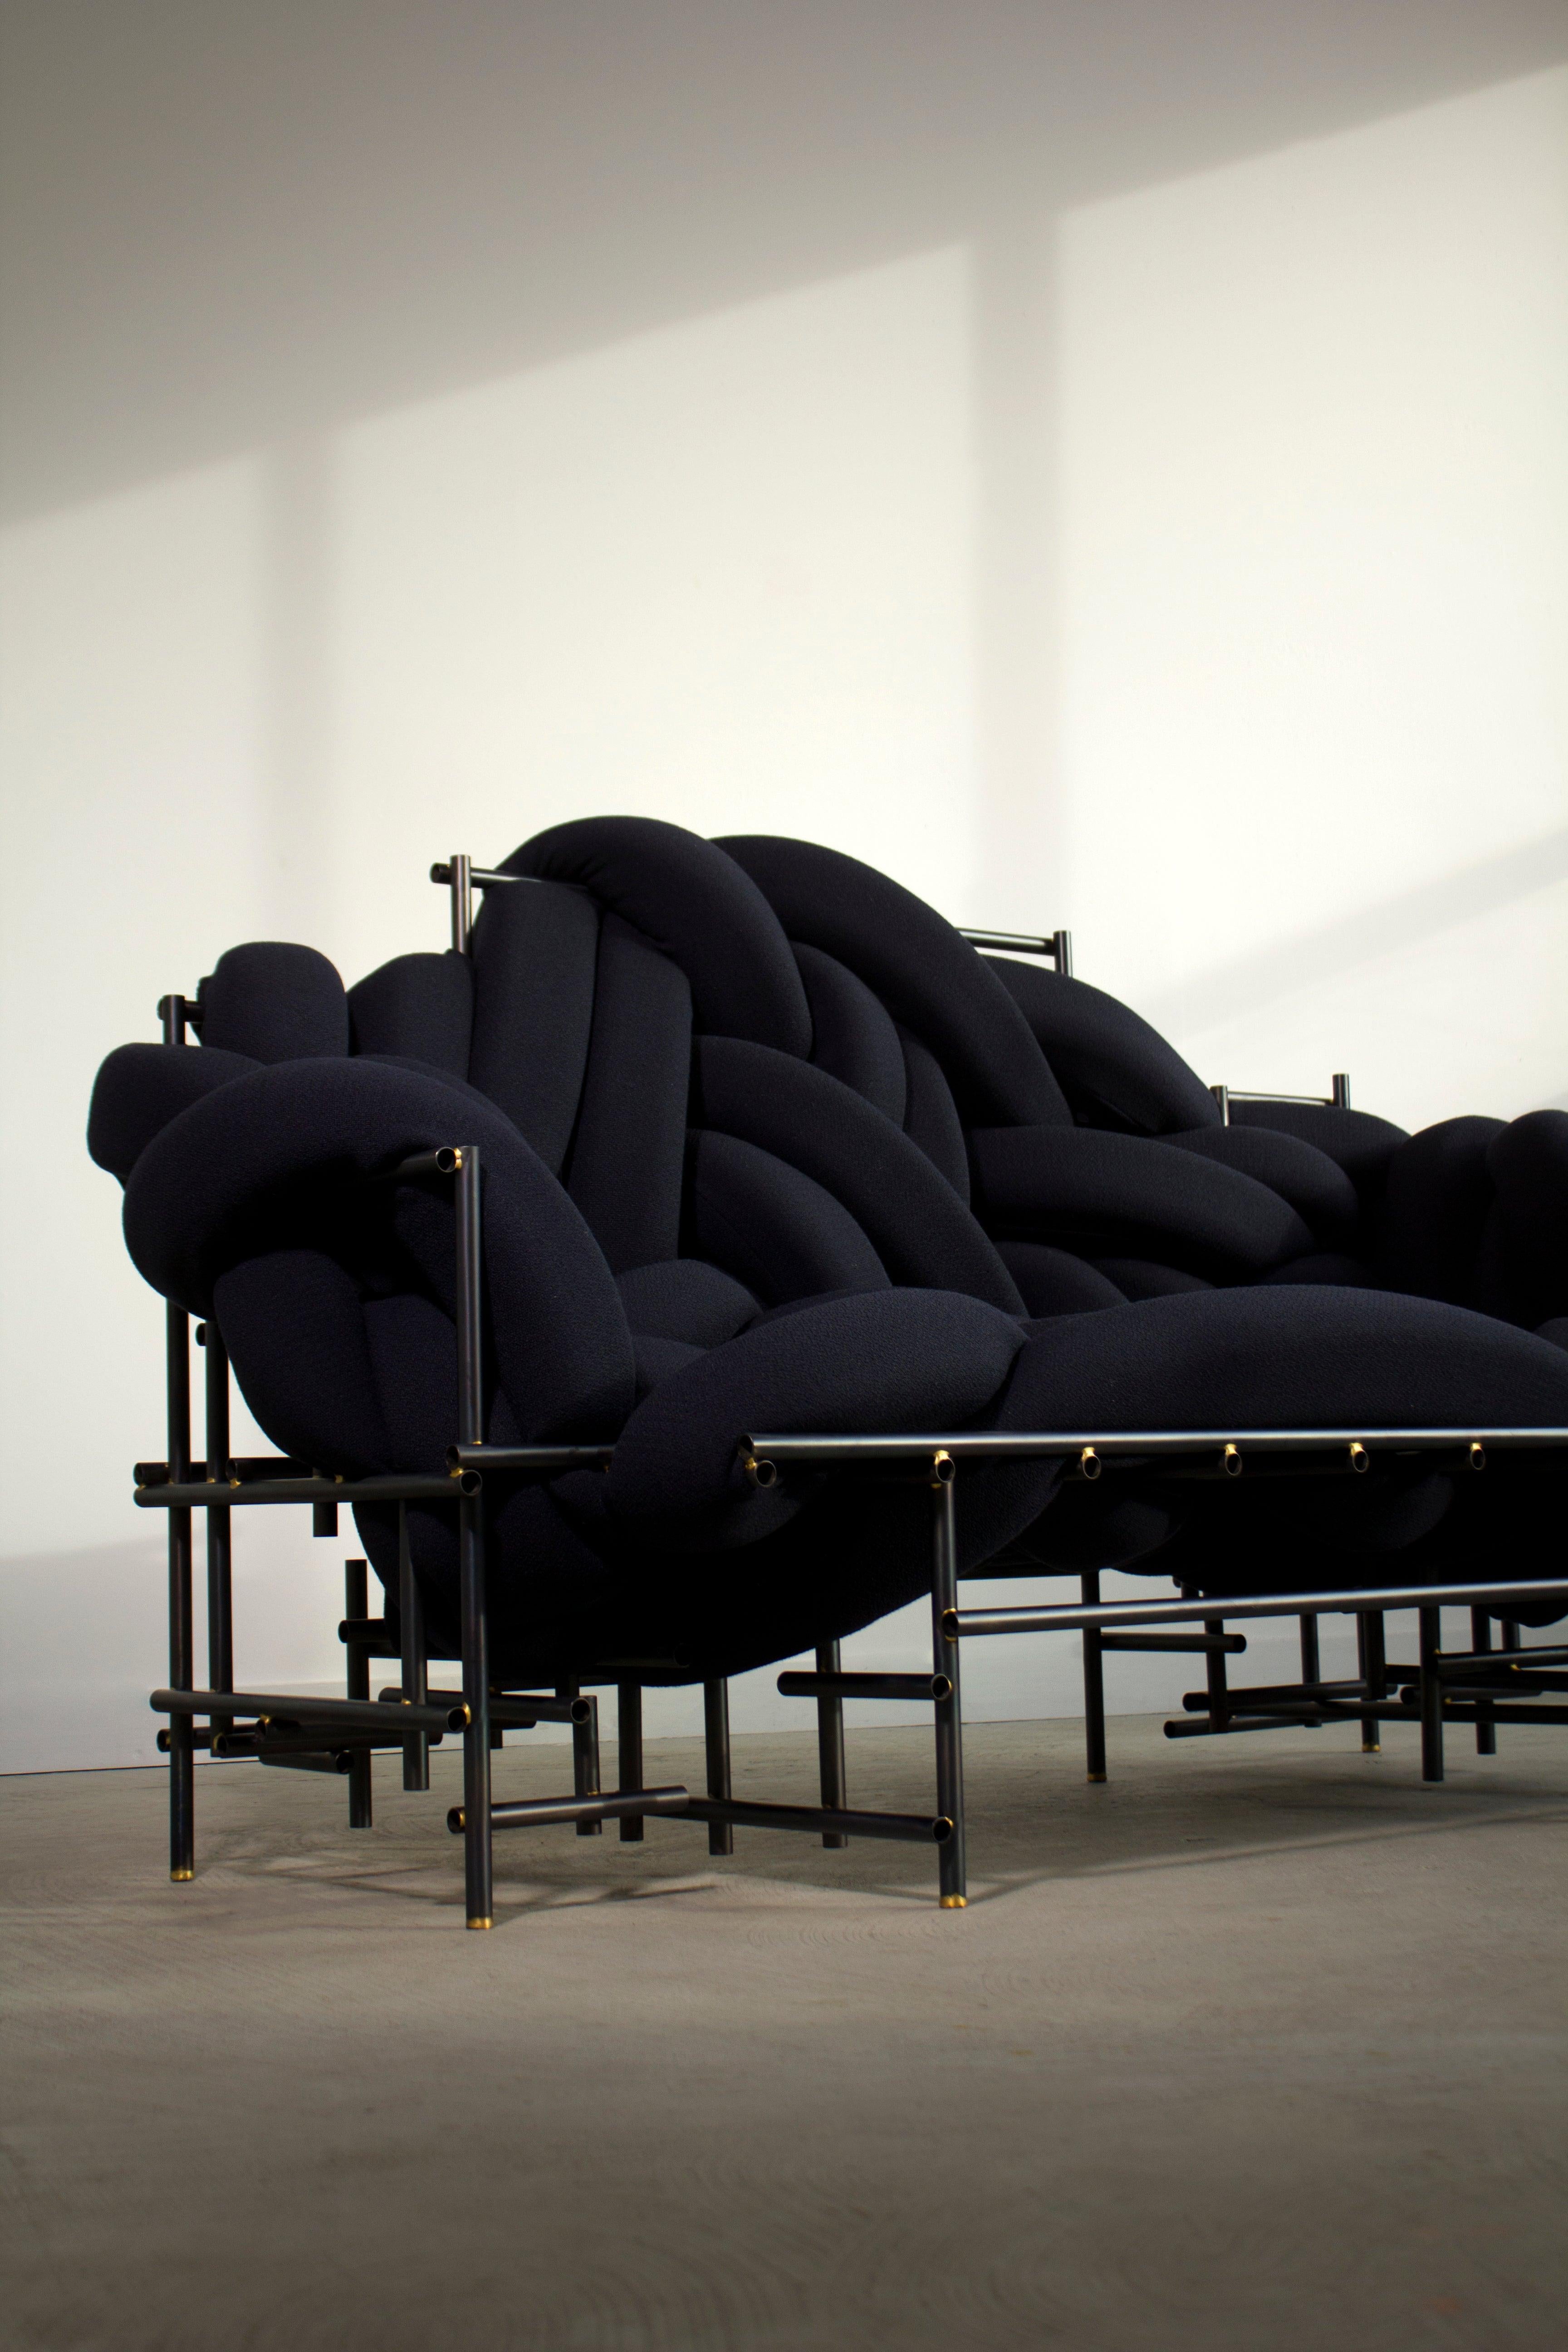 Lawless sofa by Evan Fay.
Each is a unique hand-sculpted creation. 
Dimensions:
W 1676, D 863, H 1016 mm
W 66”, D 34”, H 40” inches (can be made to order in other dimensions).
Materials: steel, brass, foam, knoll stretch appeal upholstery